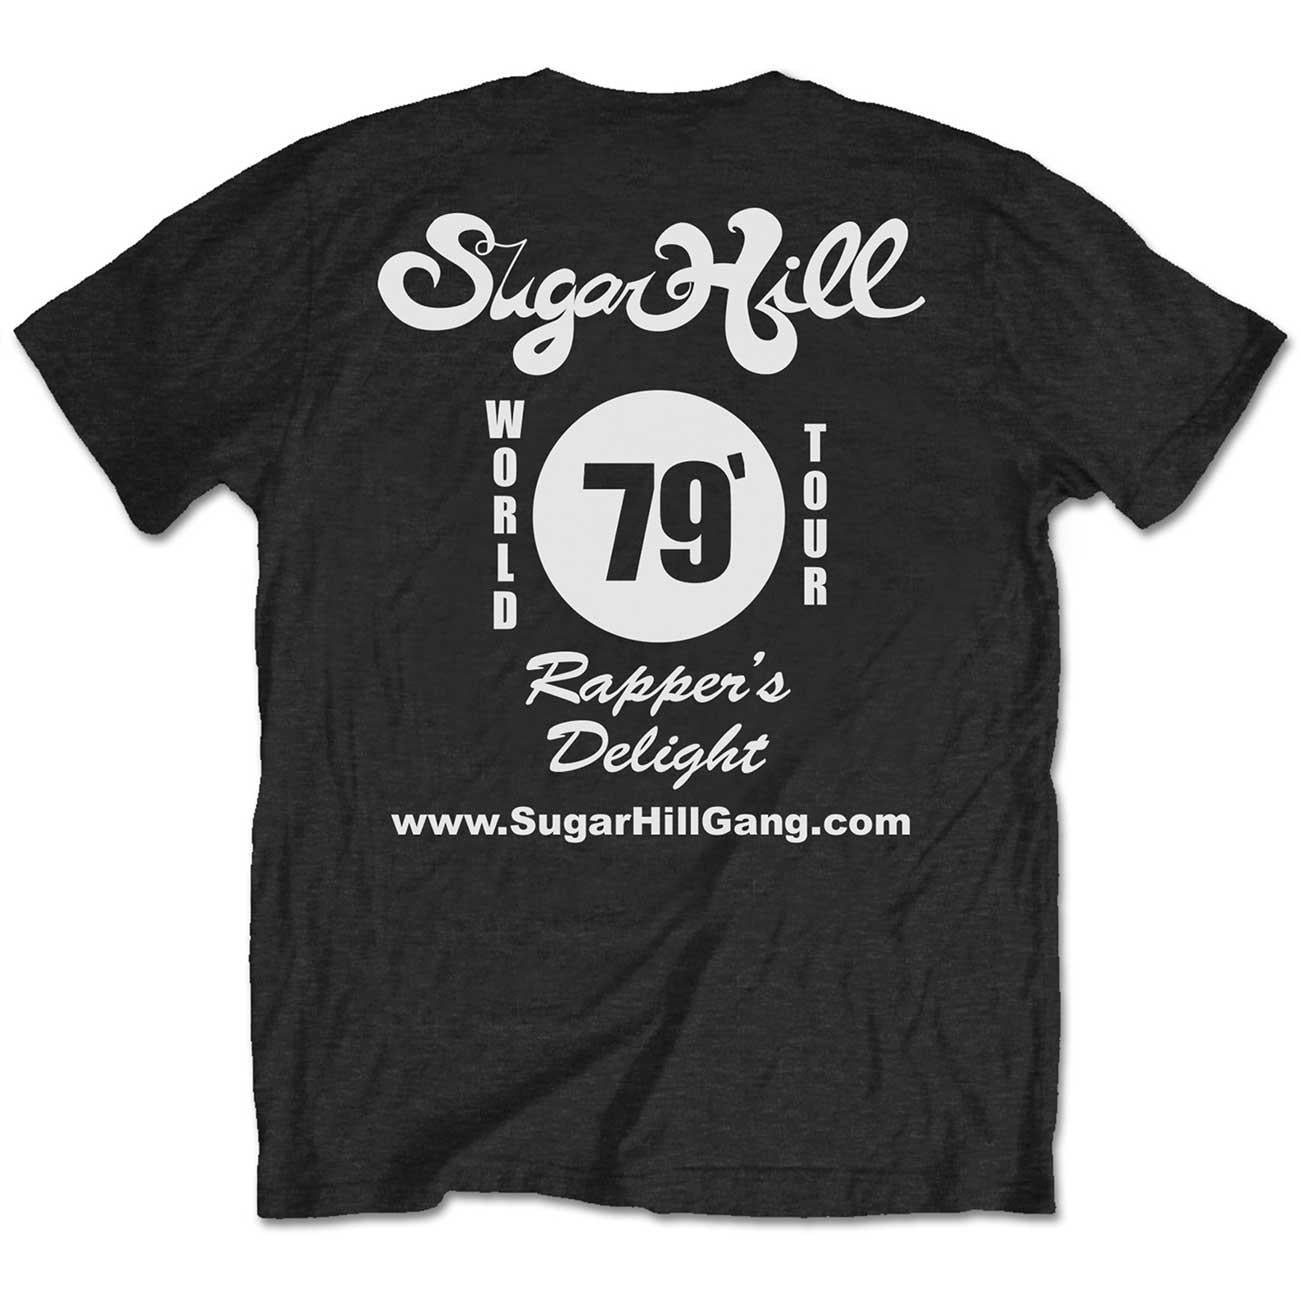 THE SUGAR HILL GANG - RAPPERS DELIGHT TOUR T-SHIRT